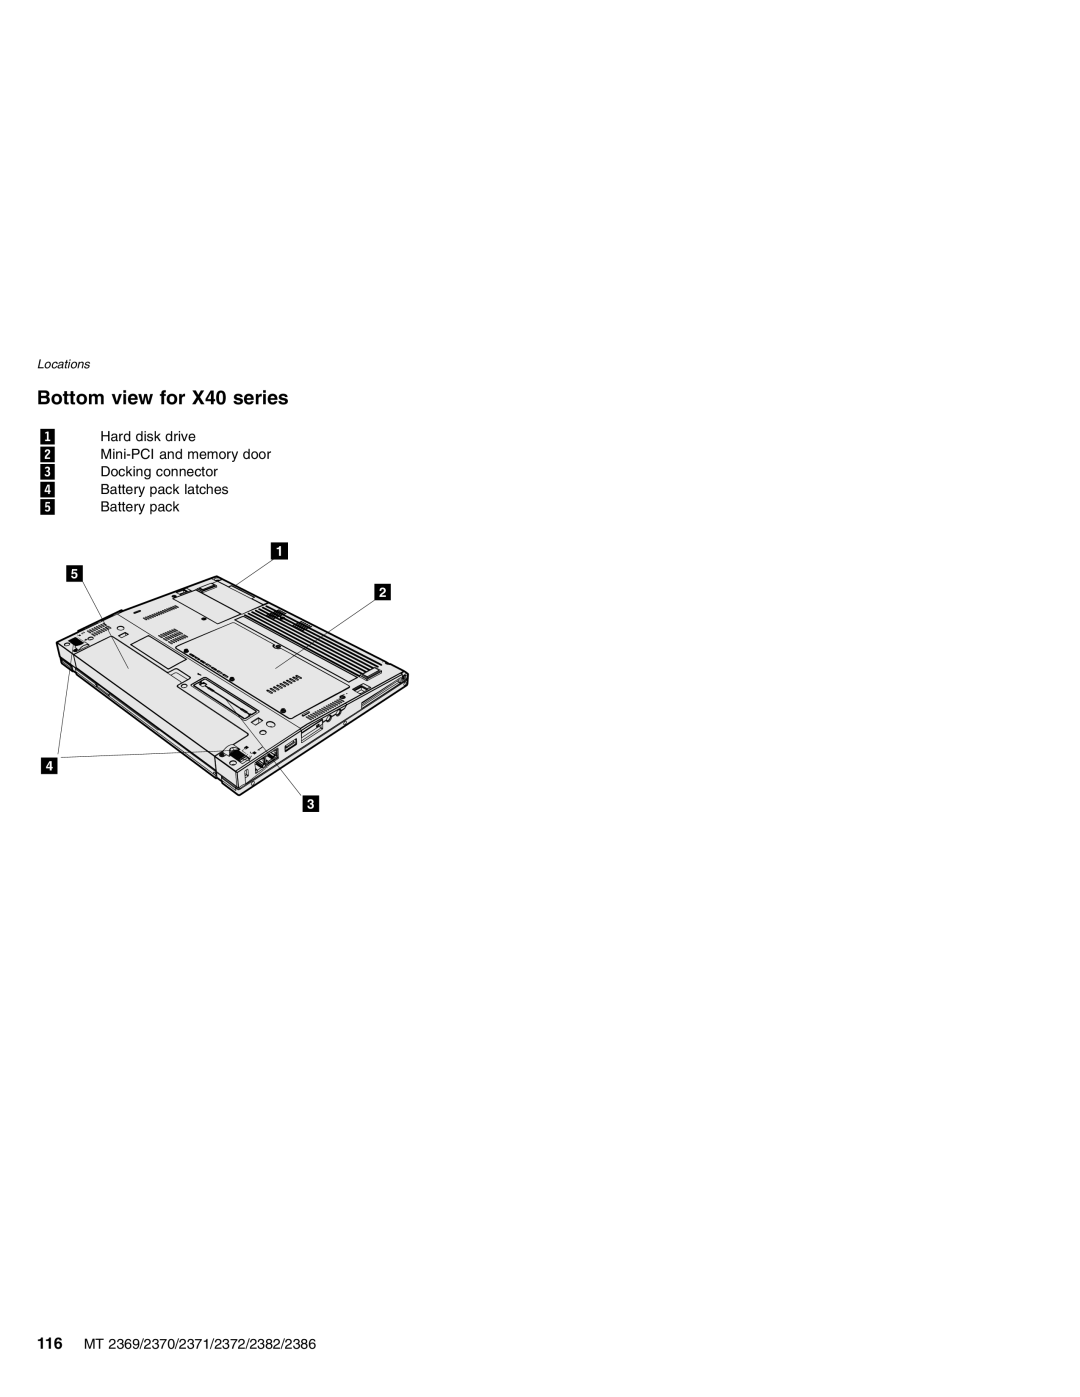 Lenovo MT 2369 manual Bottom view for X40 series, Hard disk drive Mini-PCI and memory door Docking connector 